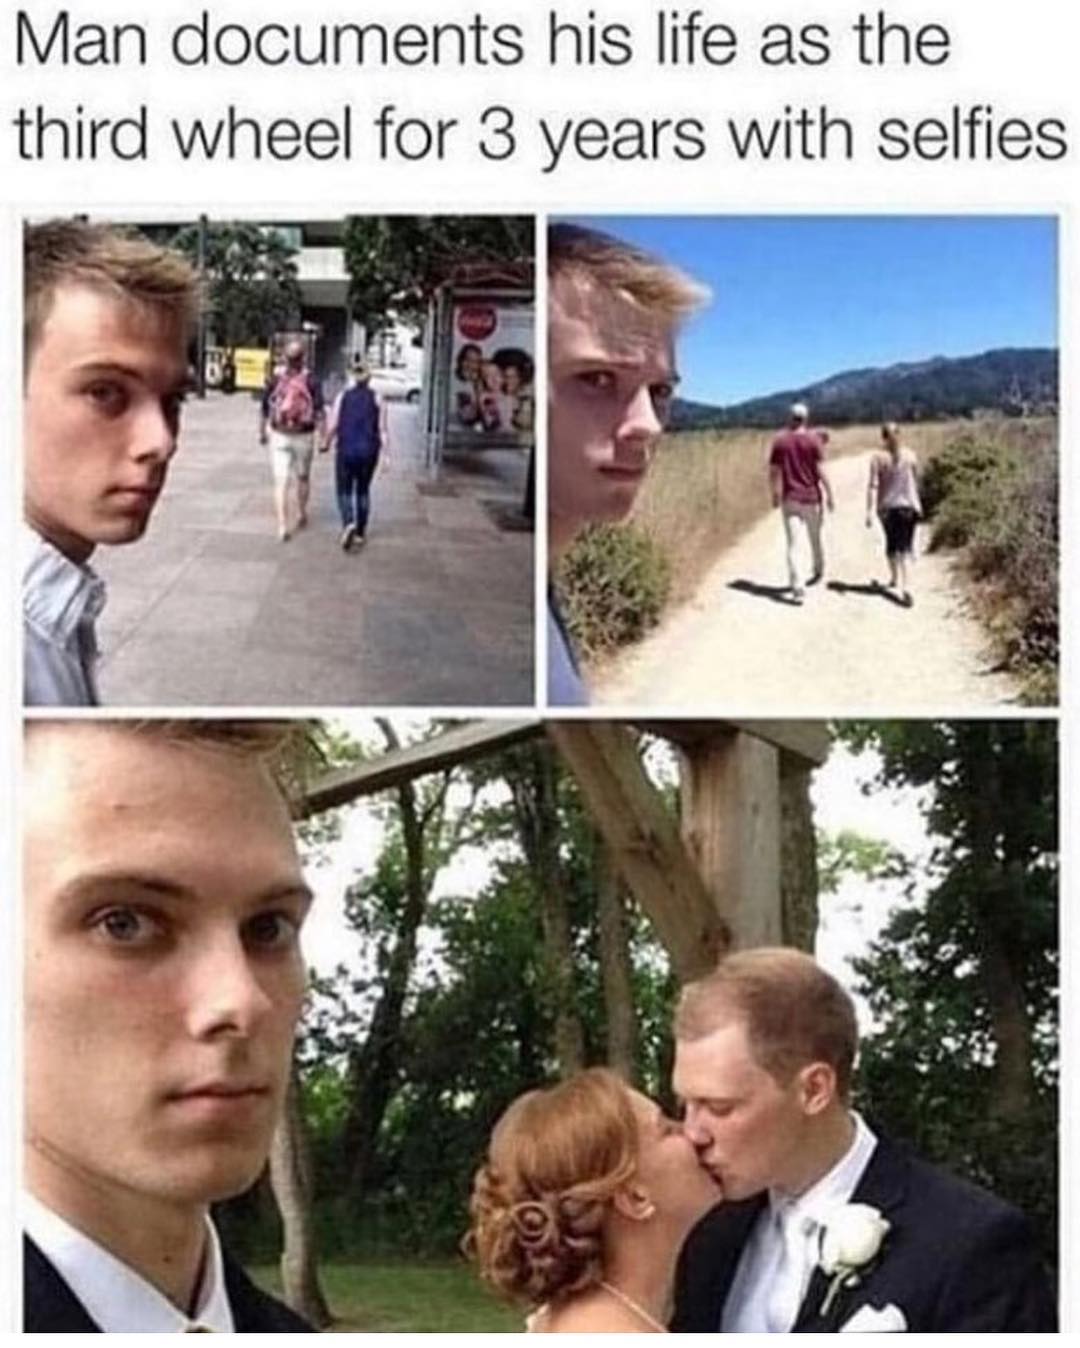 Man documents his life as the third wheel for 3 years with selfies.